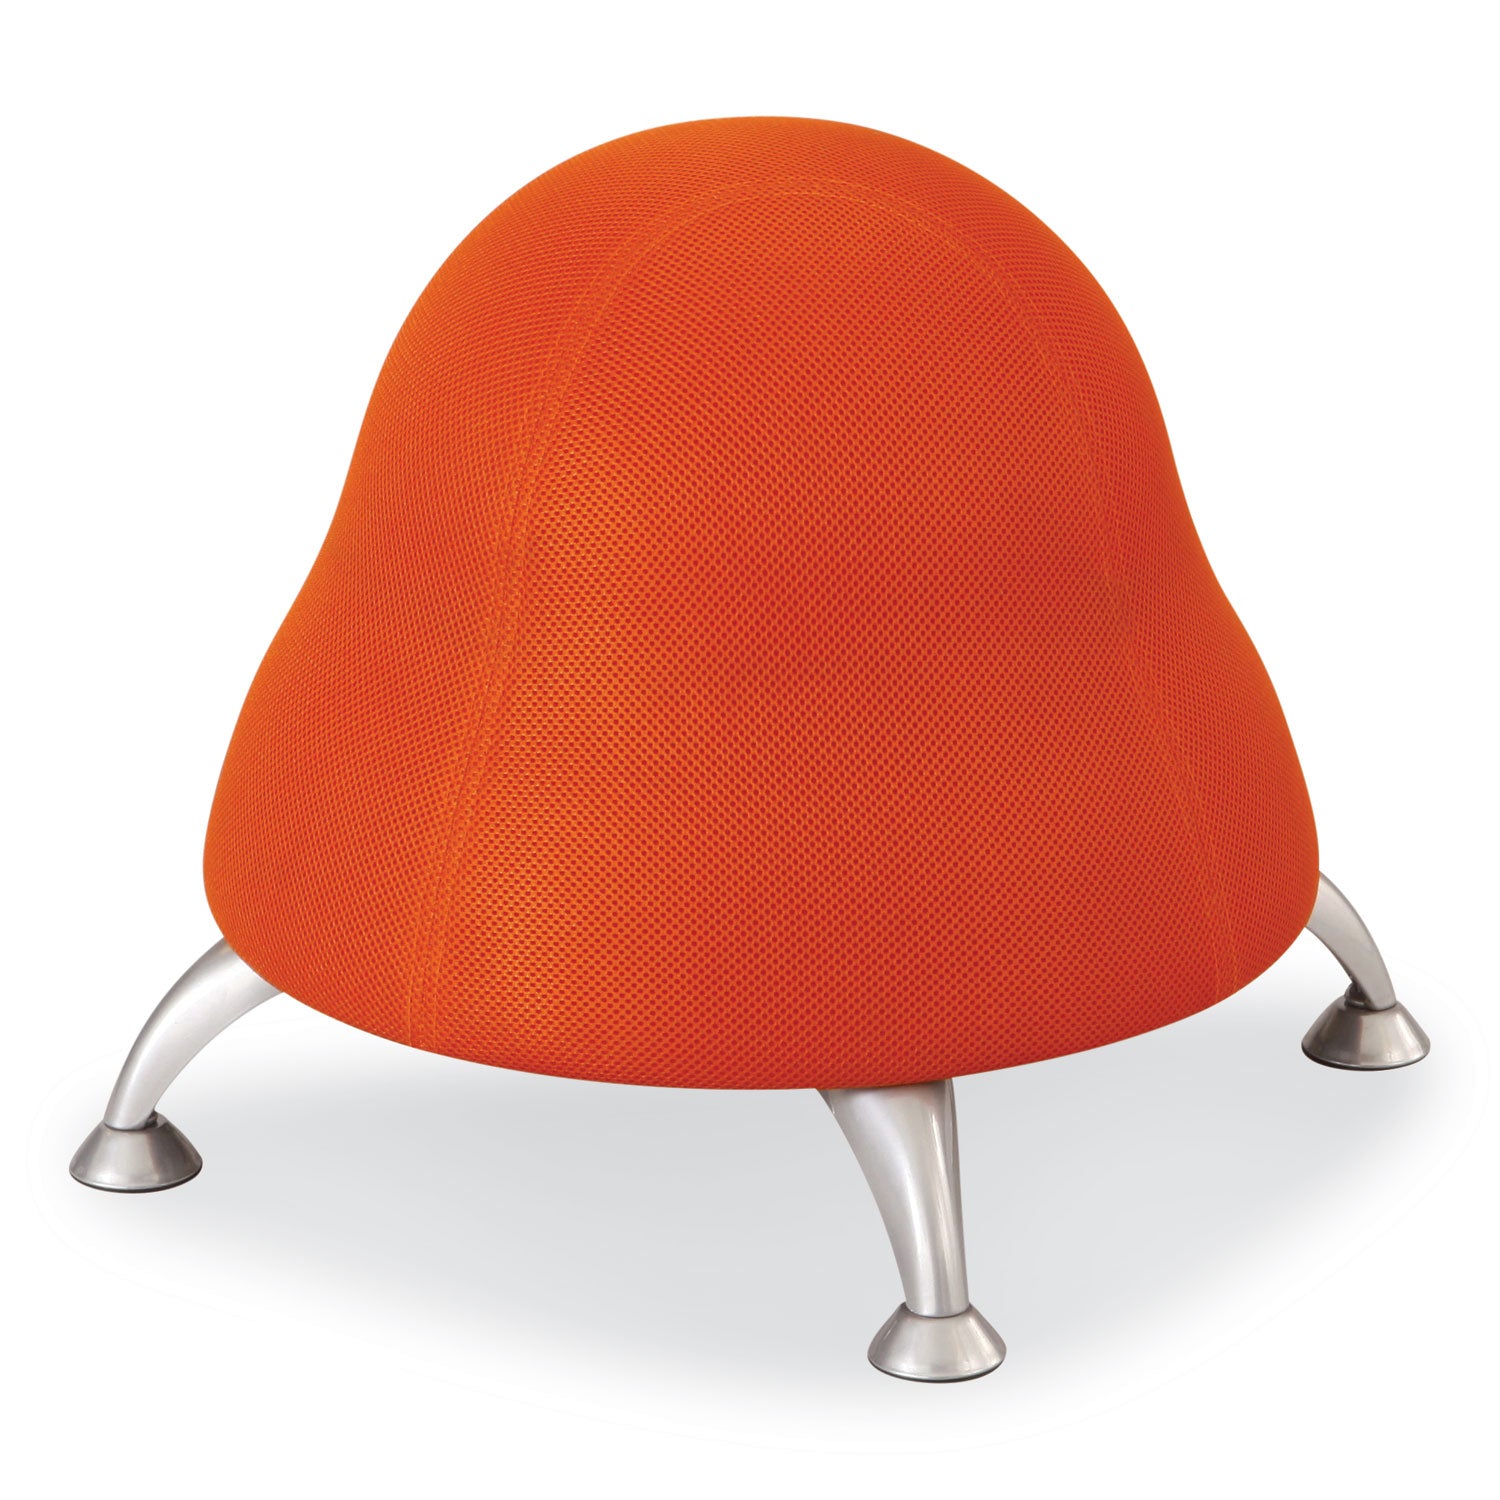 runtz-ball-chair-backless-supports-up-to-250-lb-orange-fabric-seat-silver-base-ships-in-1-3-business-days_saf4755or - 1